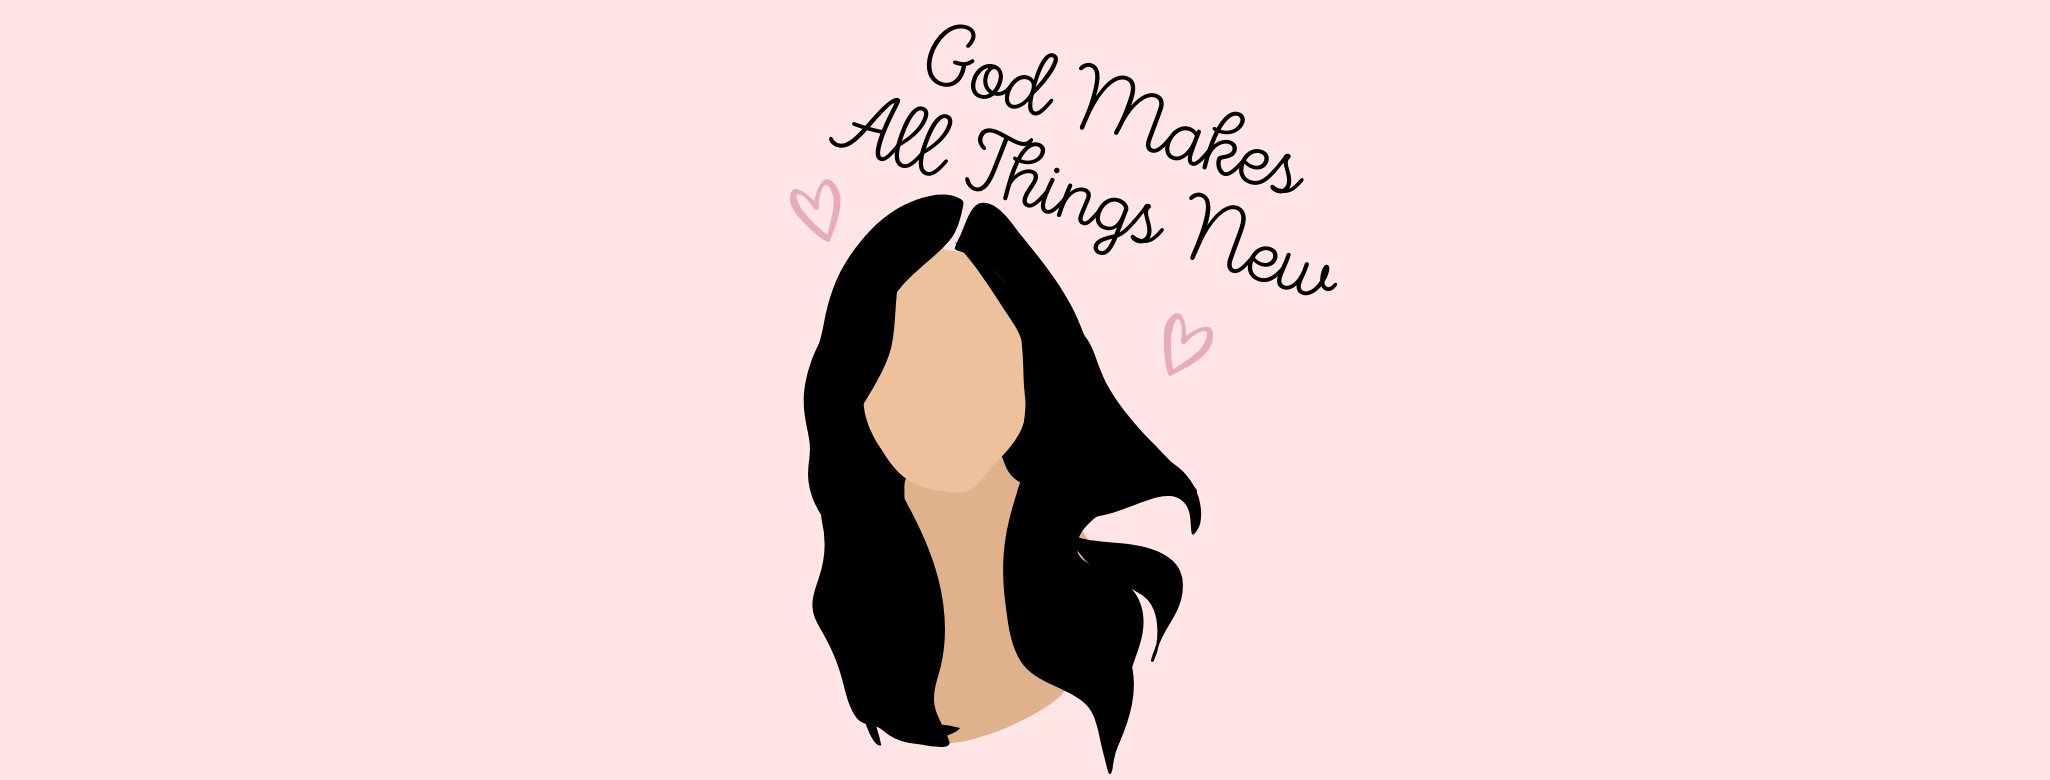 God Makes All Things New